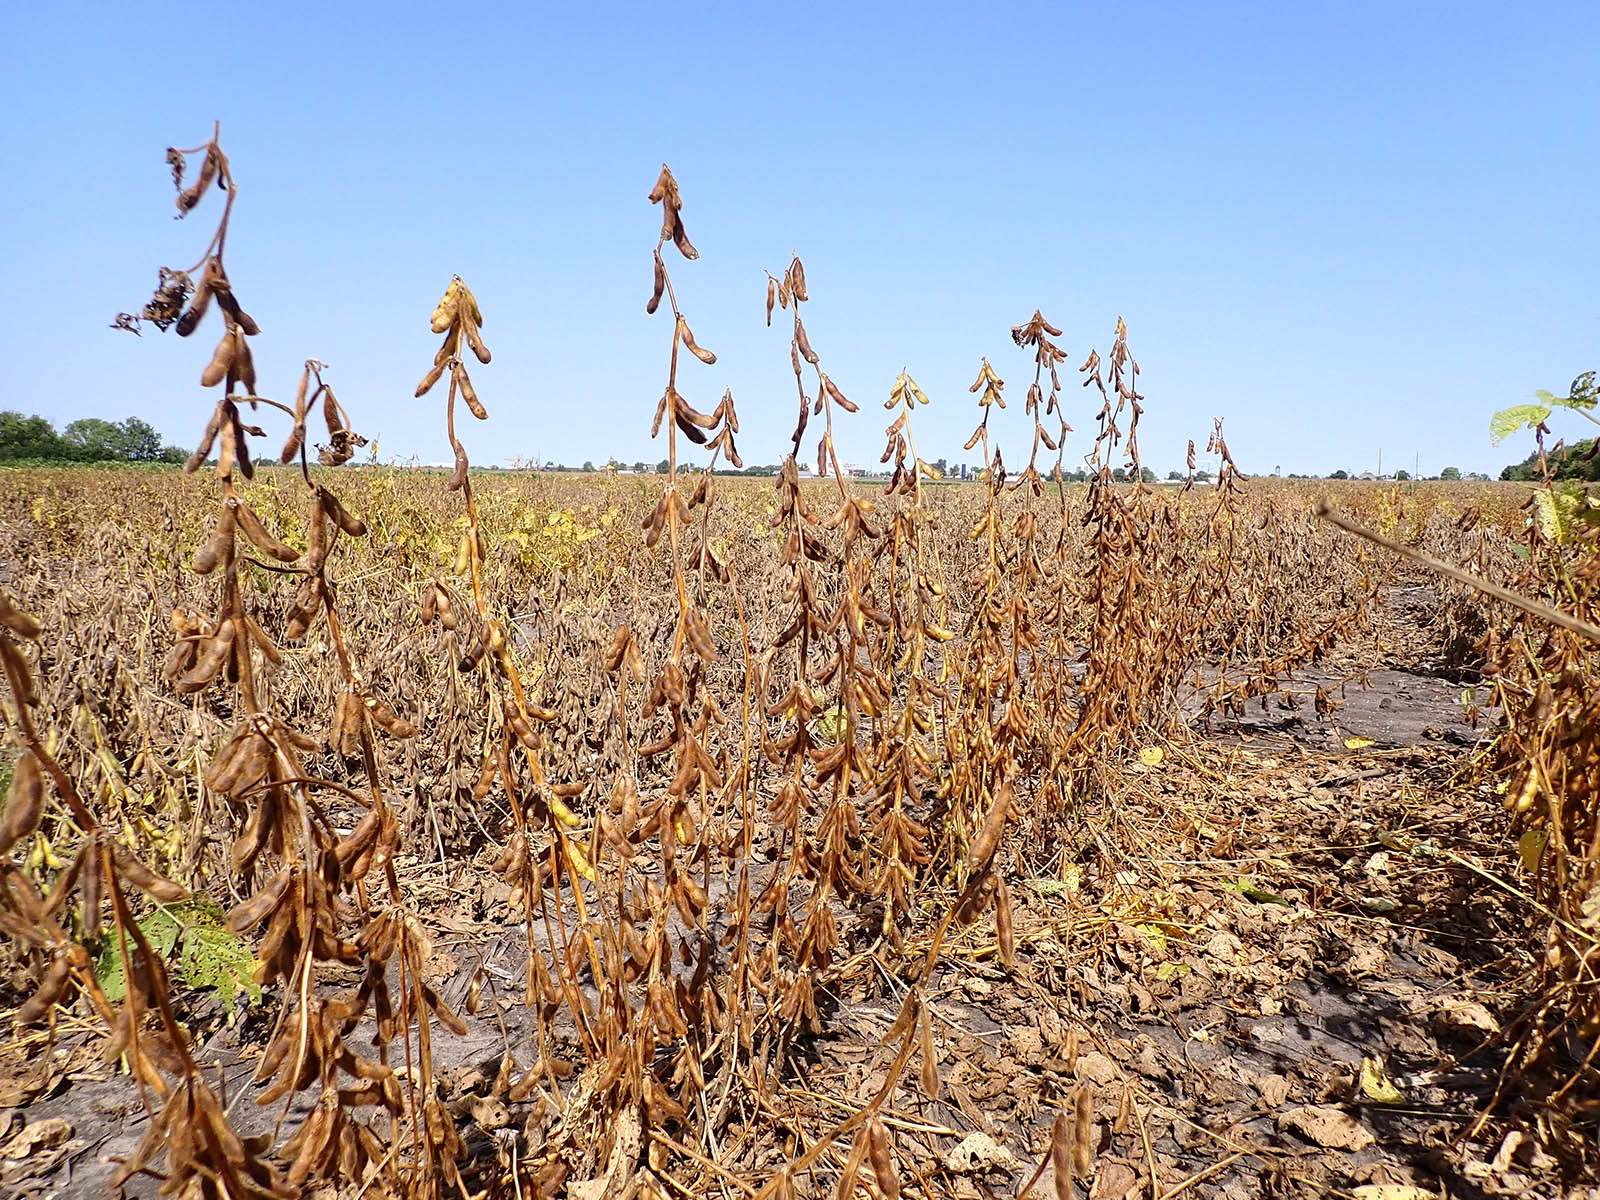 Photograph showing soybean plant in a field